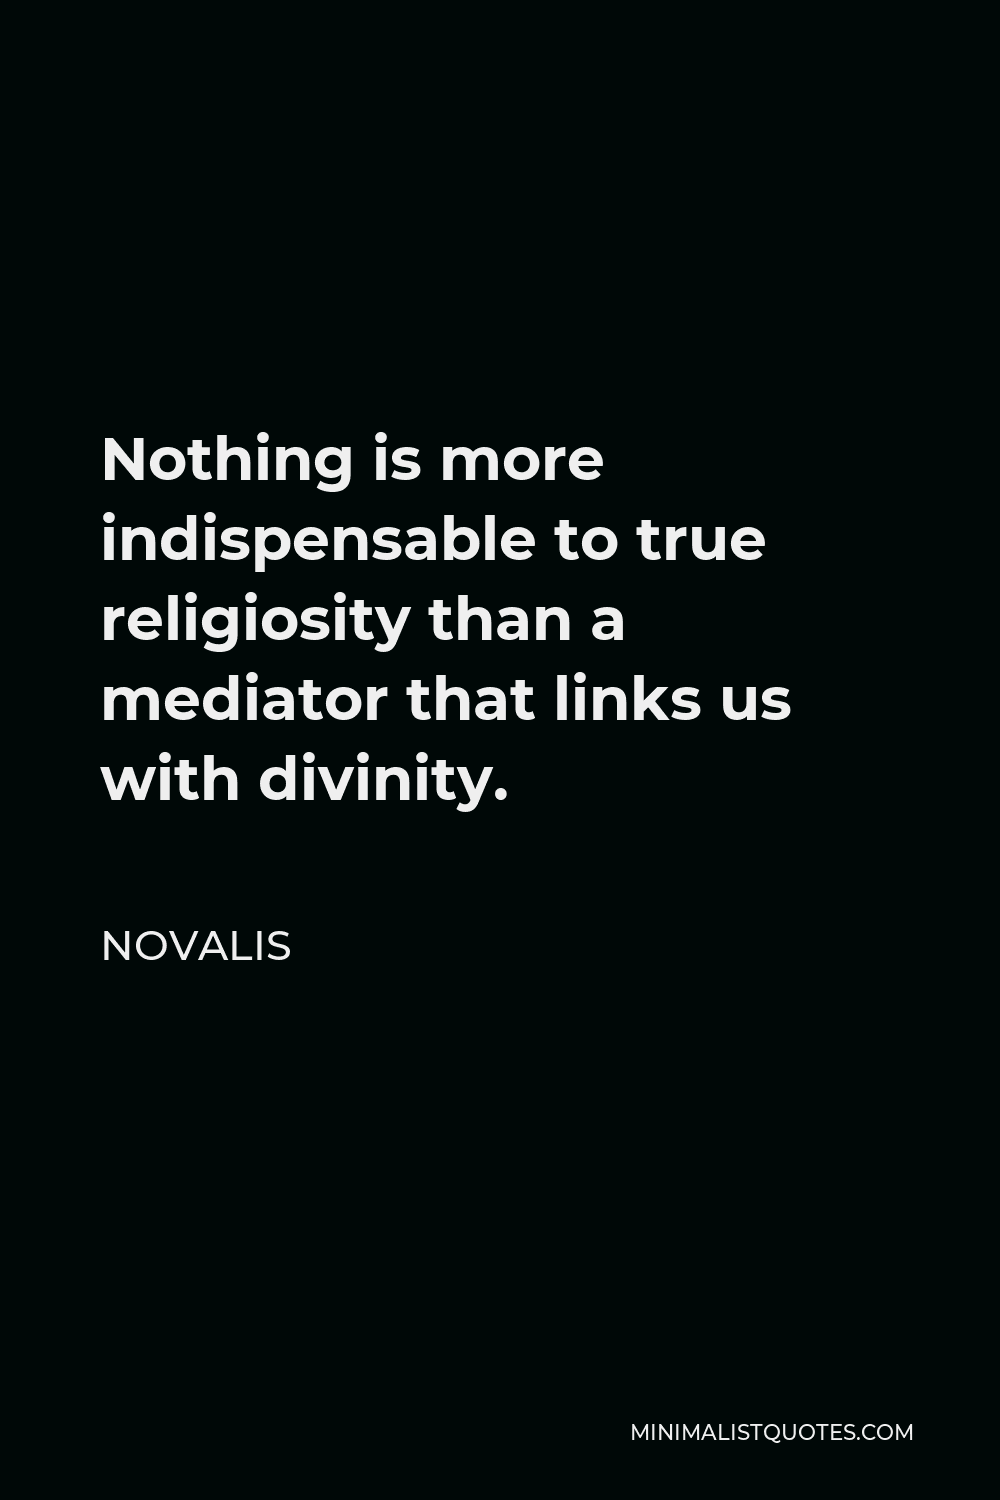 Novalis Quote - Nothing is more indispensable to true religiosity than a mediator that links us with divinity.